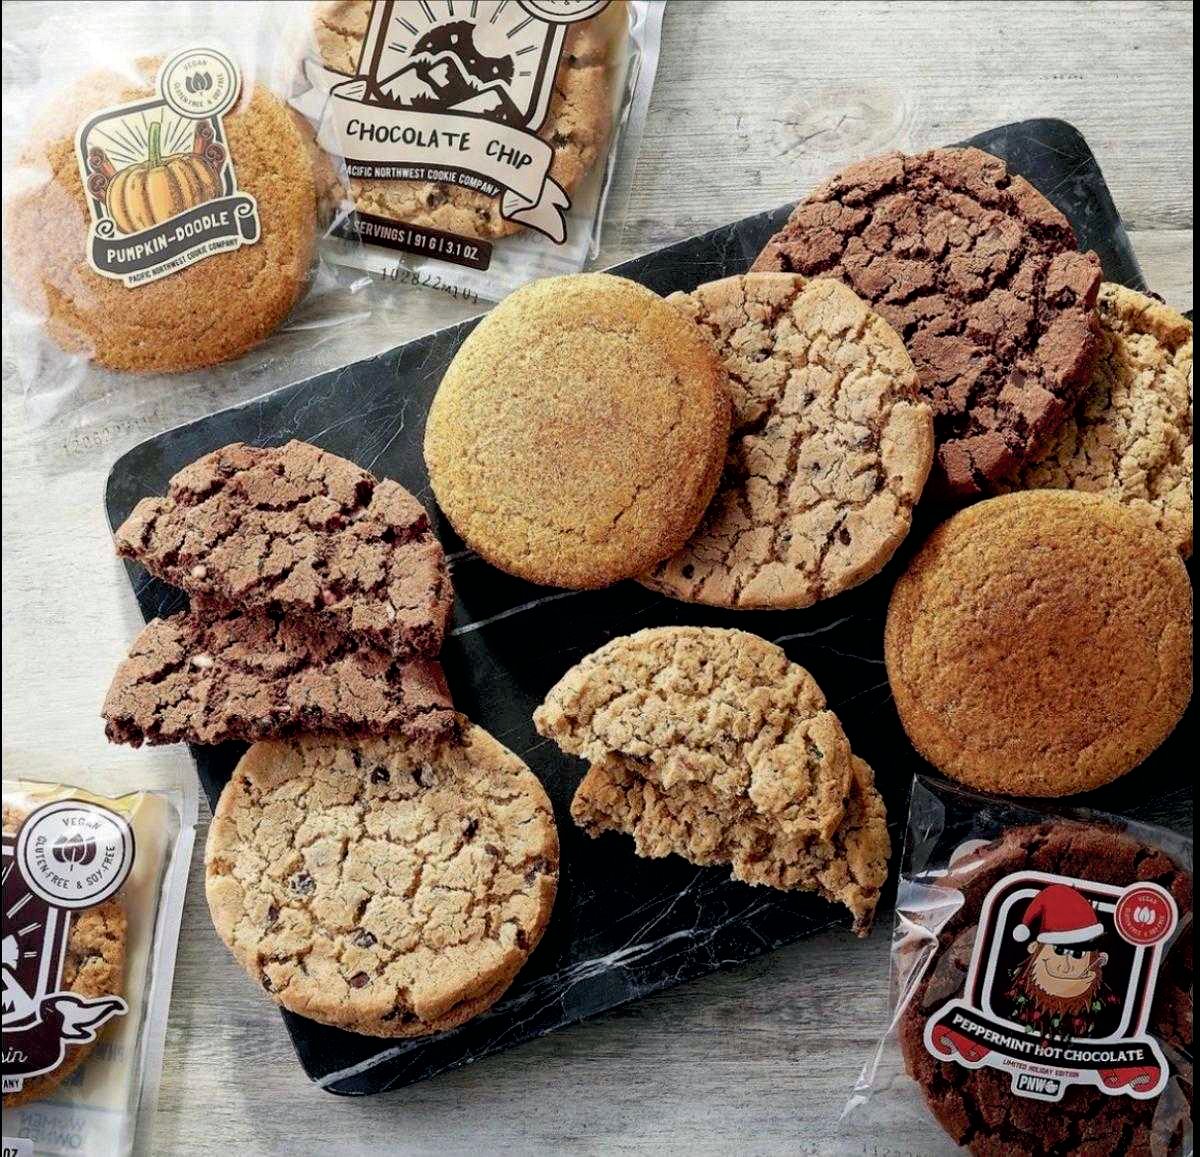 PNW Cookie Co. products are displayed in this photograph provided by Callie Carpenter, owner and founder of the business.